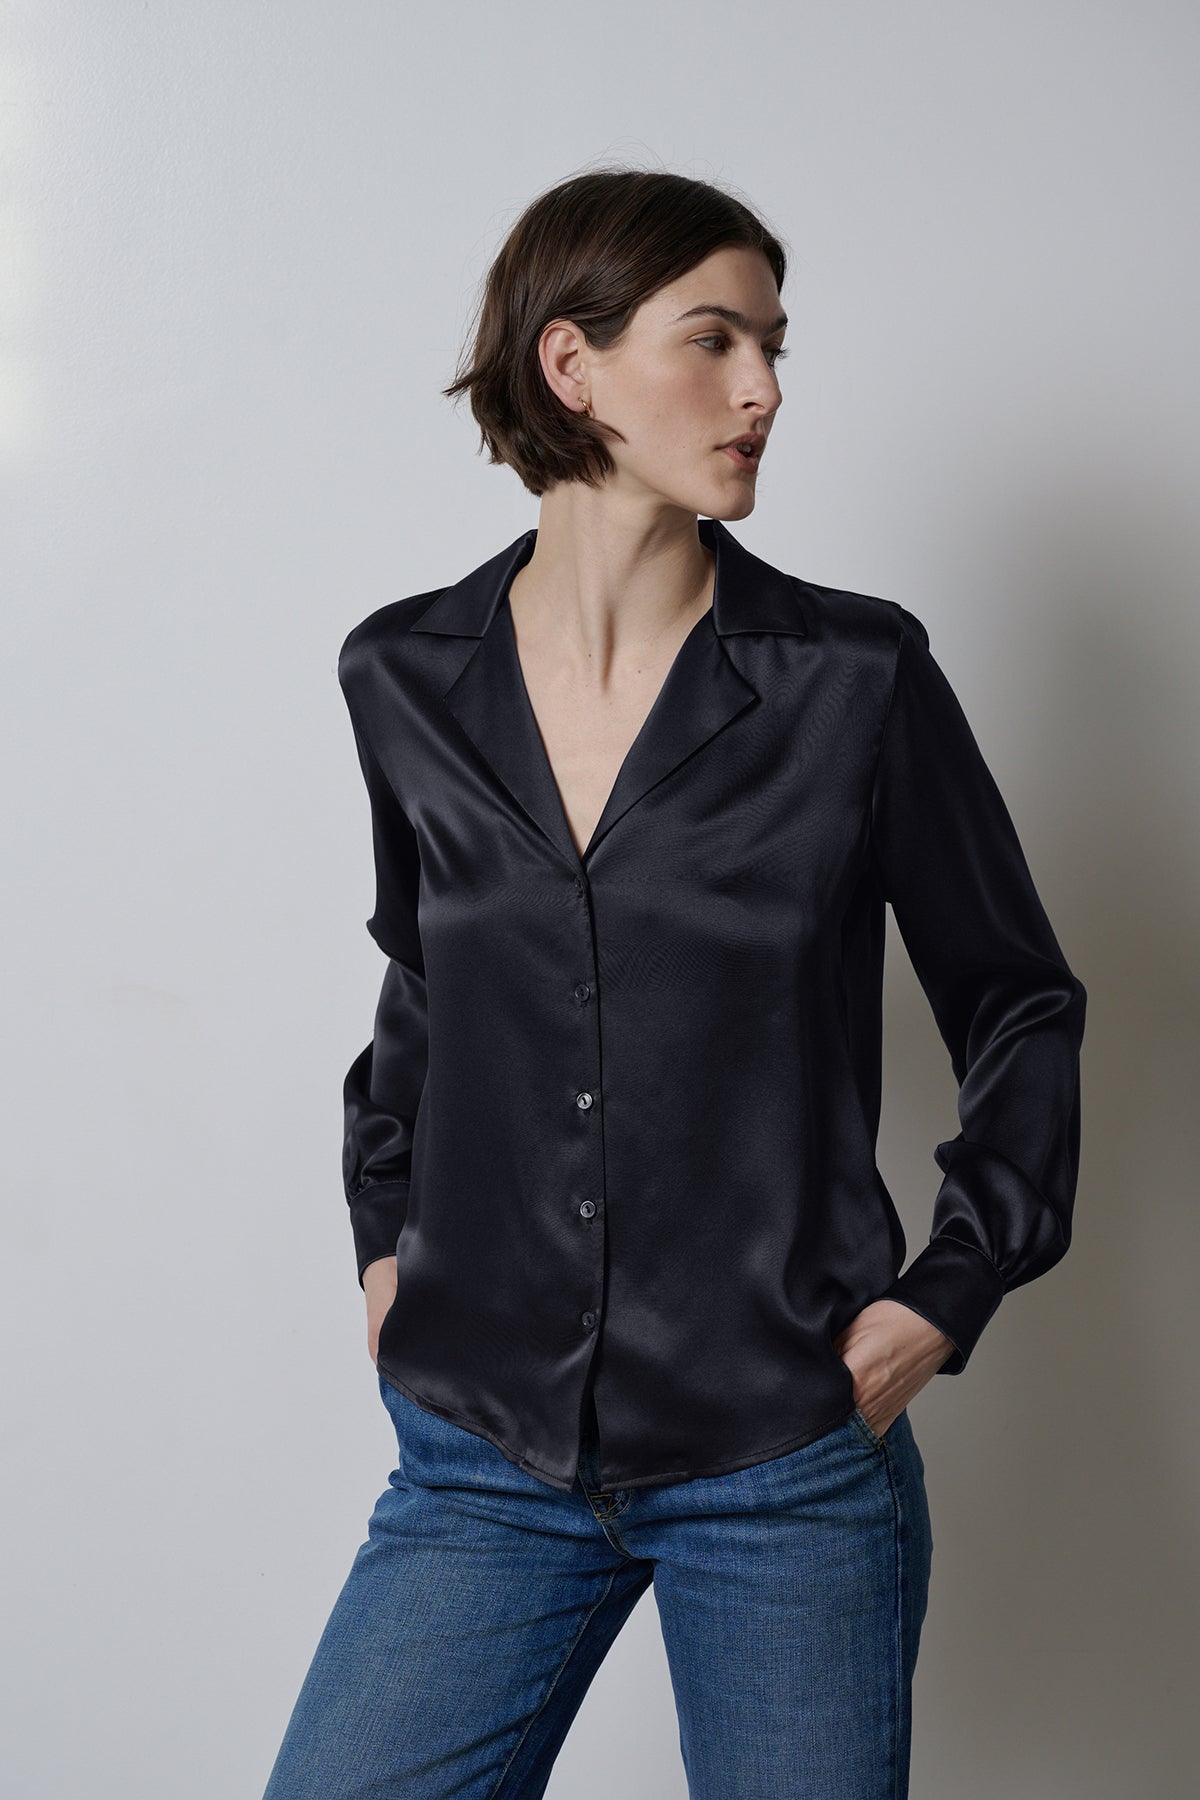 The model is wearing a timeless SOHO TOP blouse from Velvet by Jenny Graham with button-up detailing, paired with jeans.-35547448901825